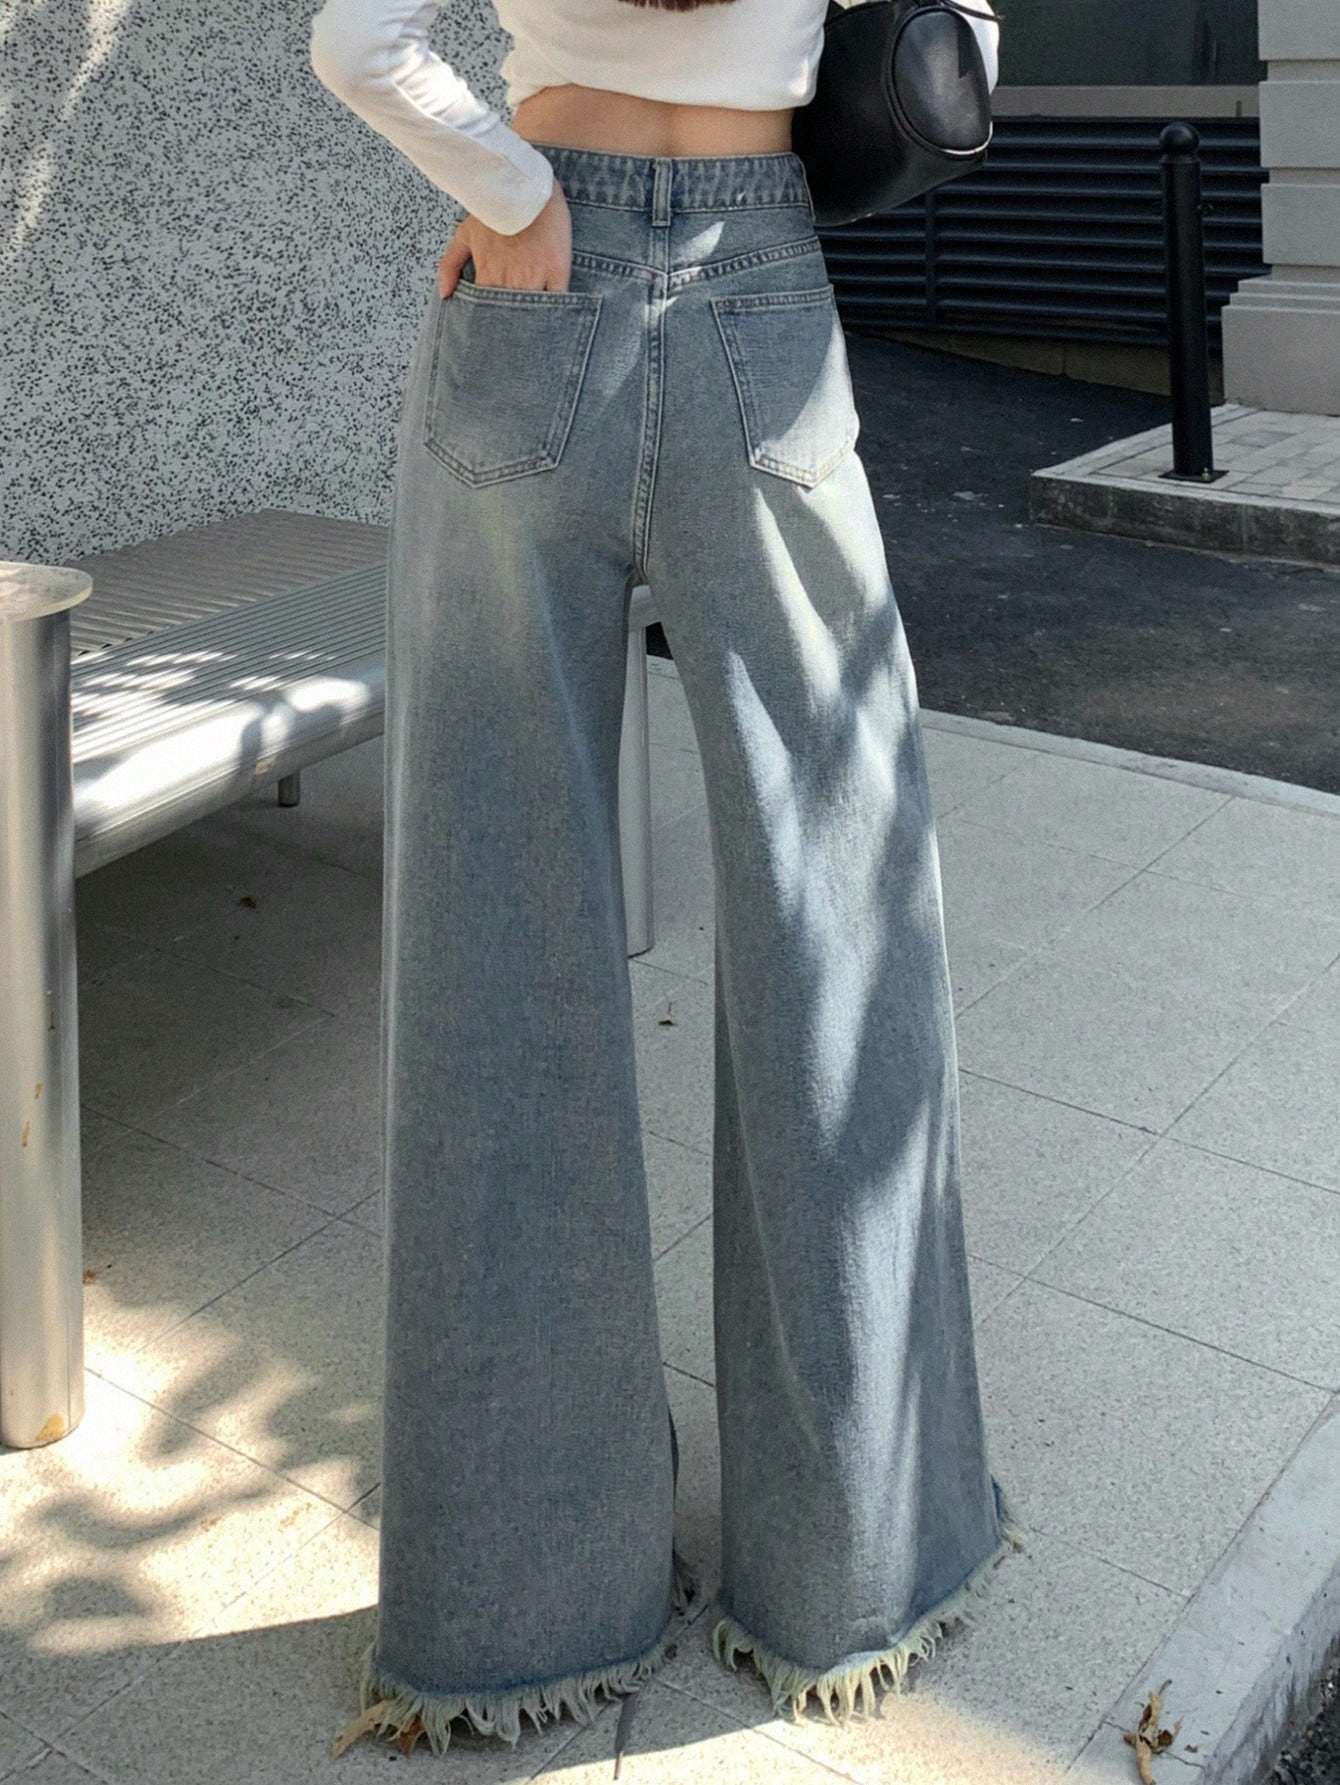 Solid Wide Leg Jeans